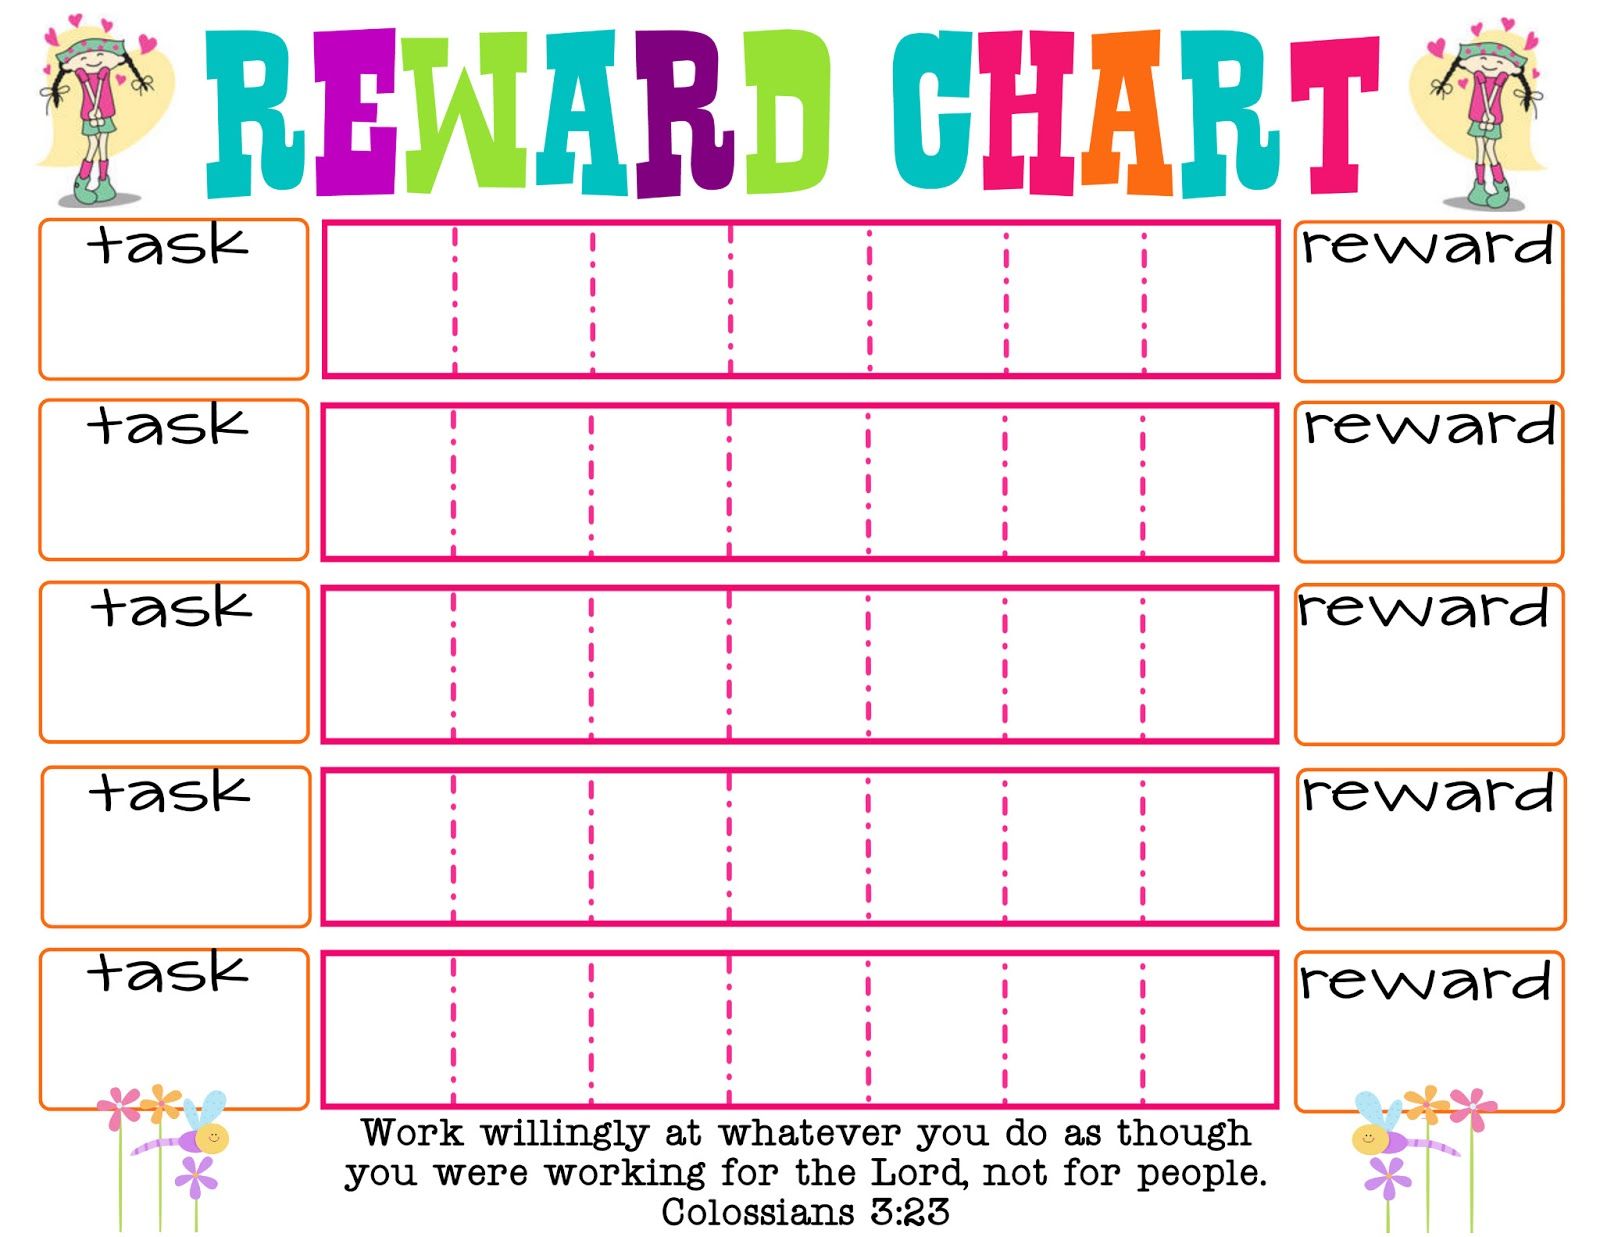 looking-for-the-best-reward-chart-ideas-for-your-kids-here-you-can